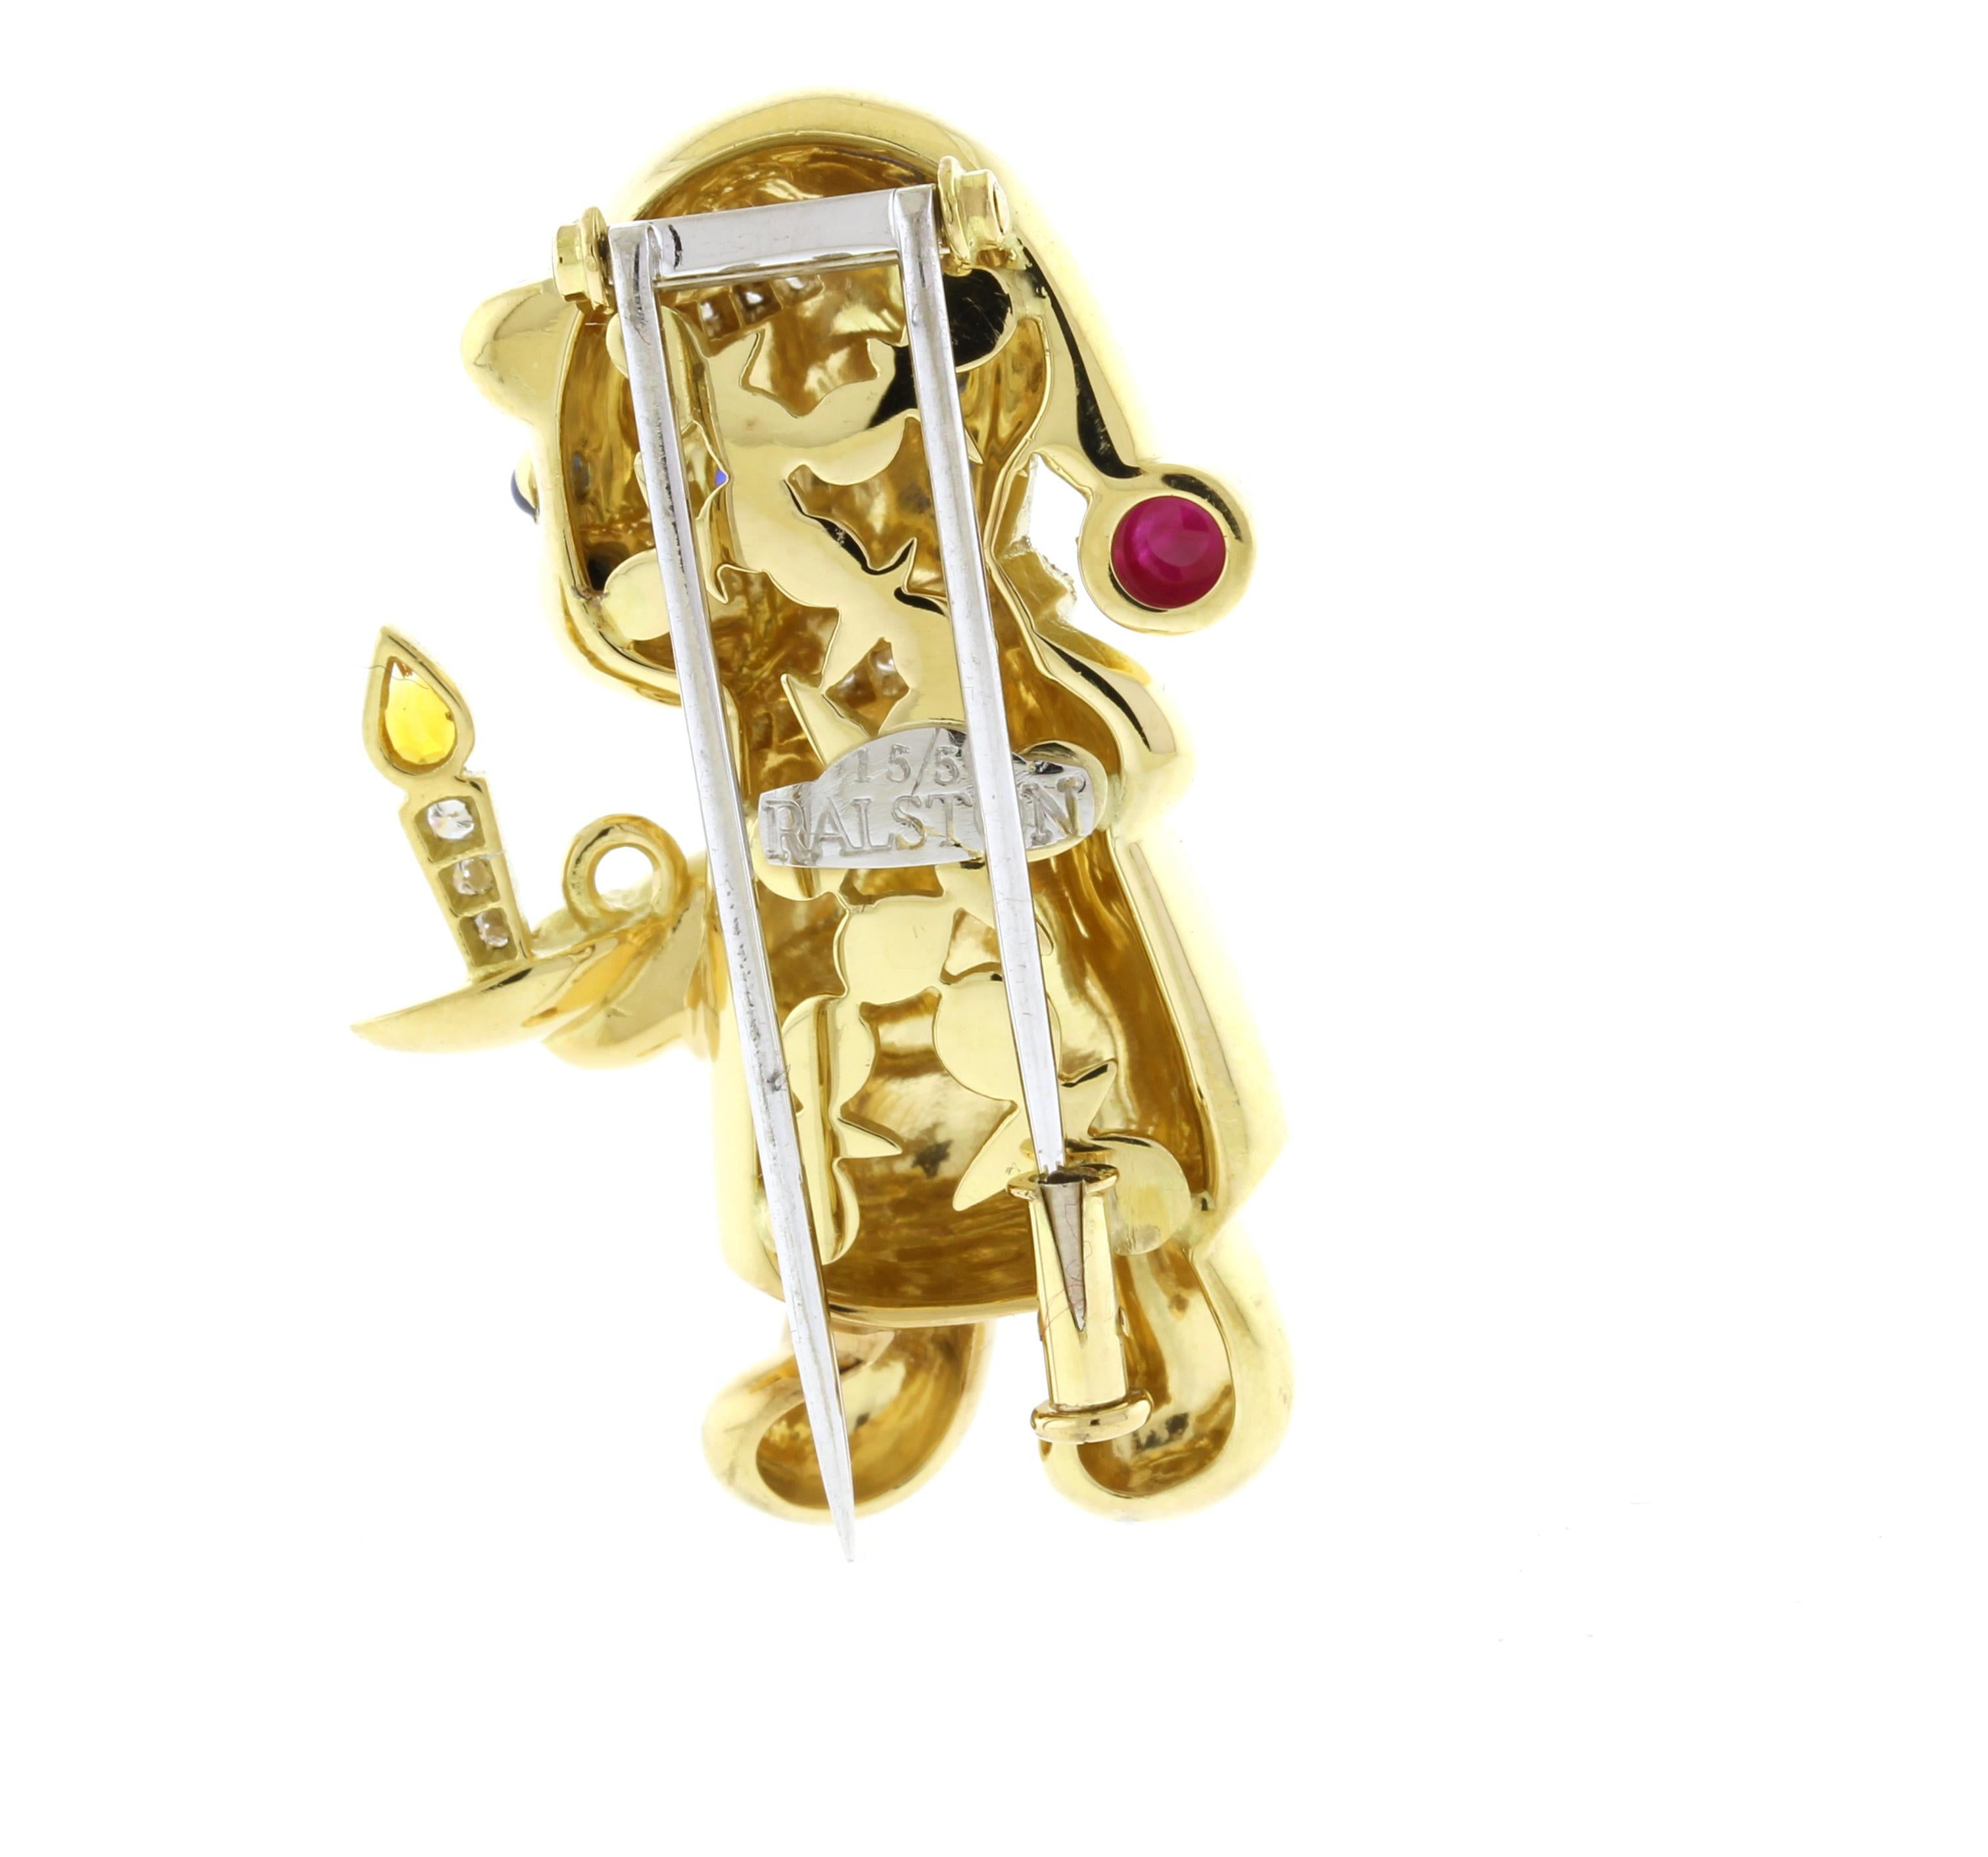 Jonathan Ralston's Exquisite Limited Edition Gold Bear Brooch In Excellent Condition For Sale In Bethesda, MD